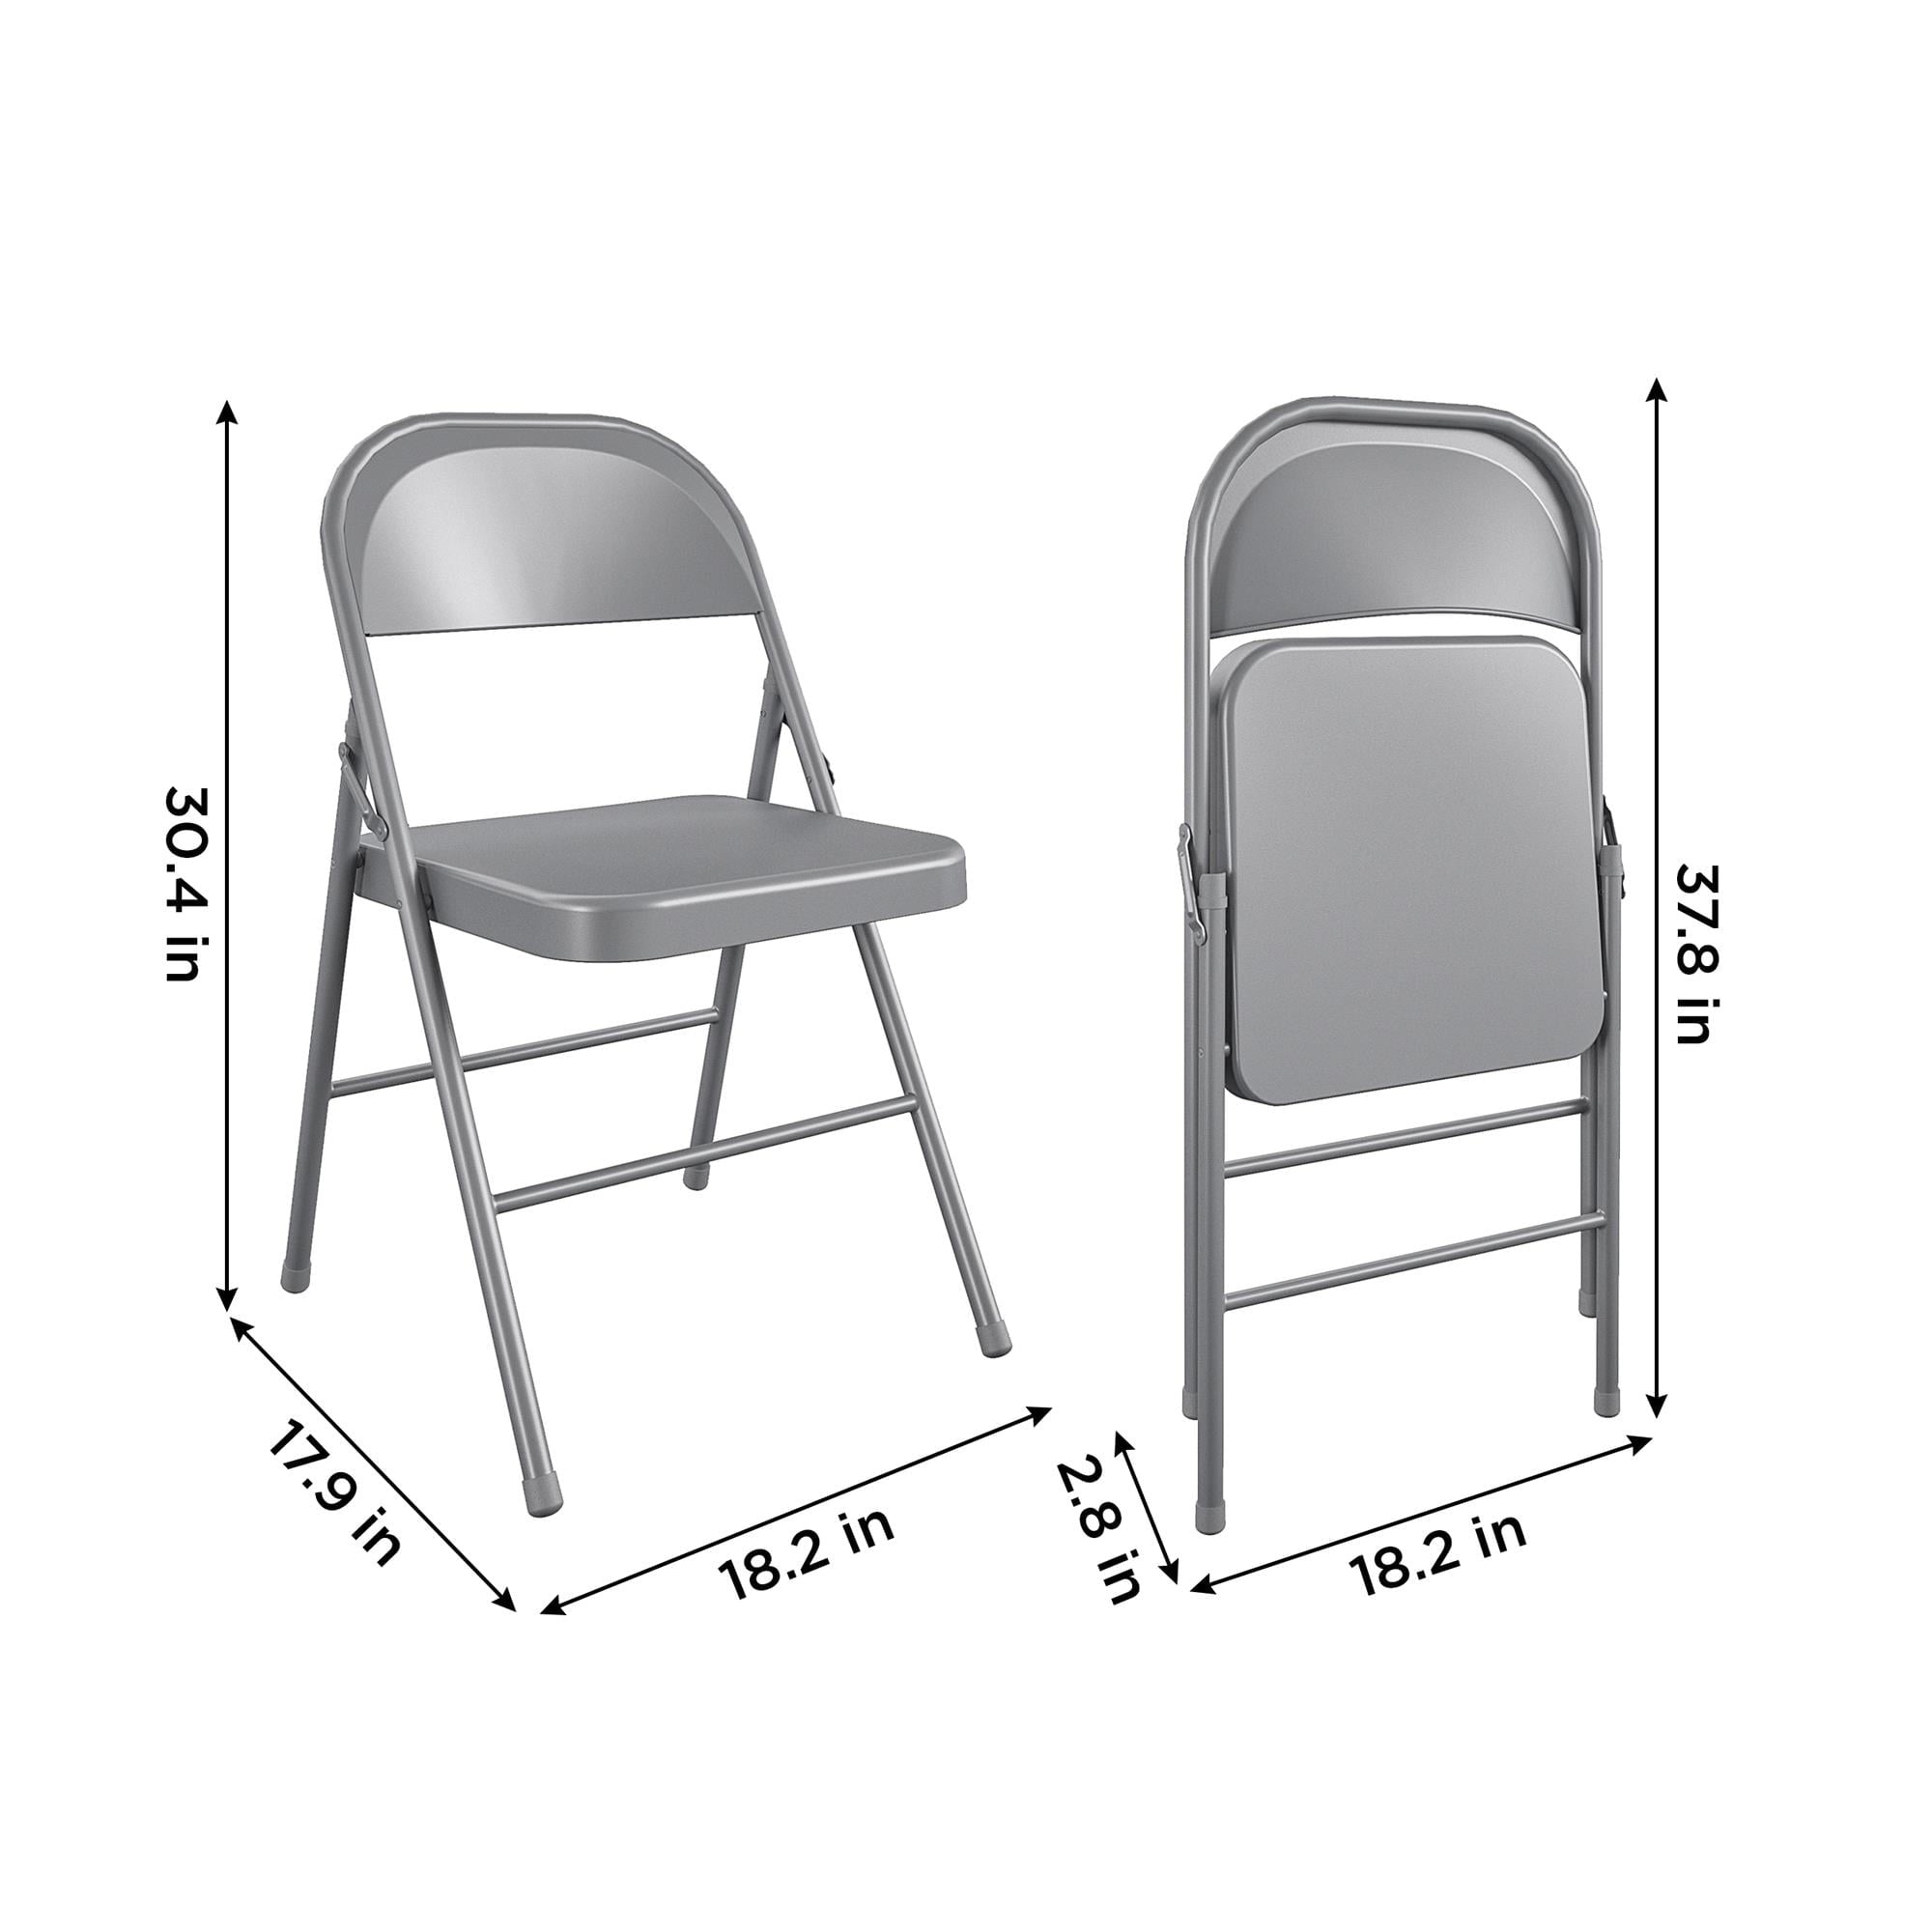 Mainstays Steel Folding Chair In Grey Color